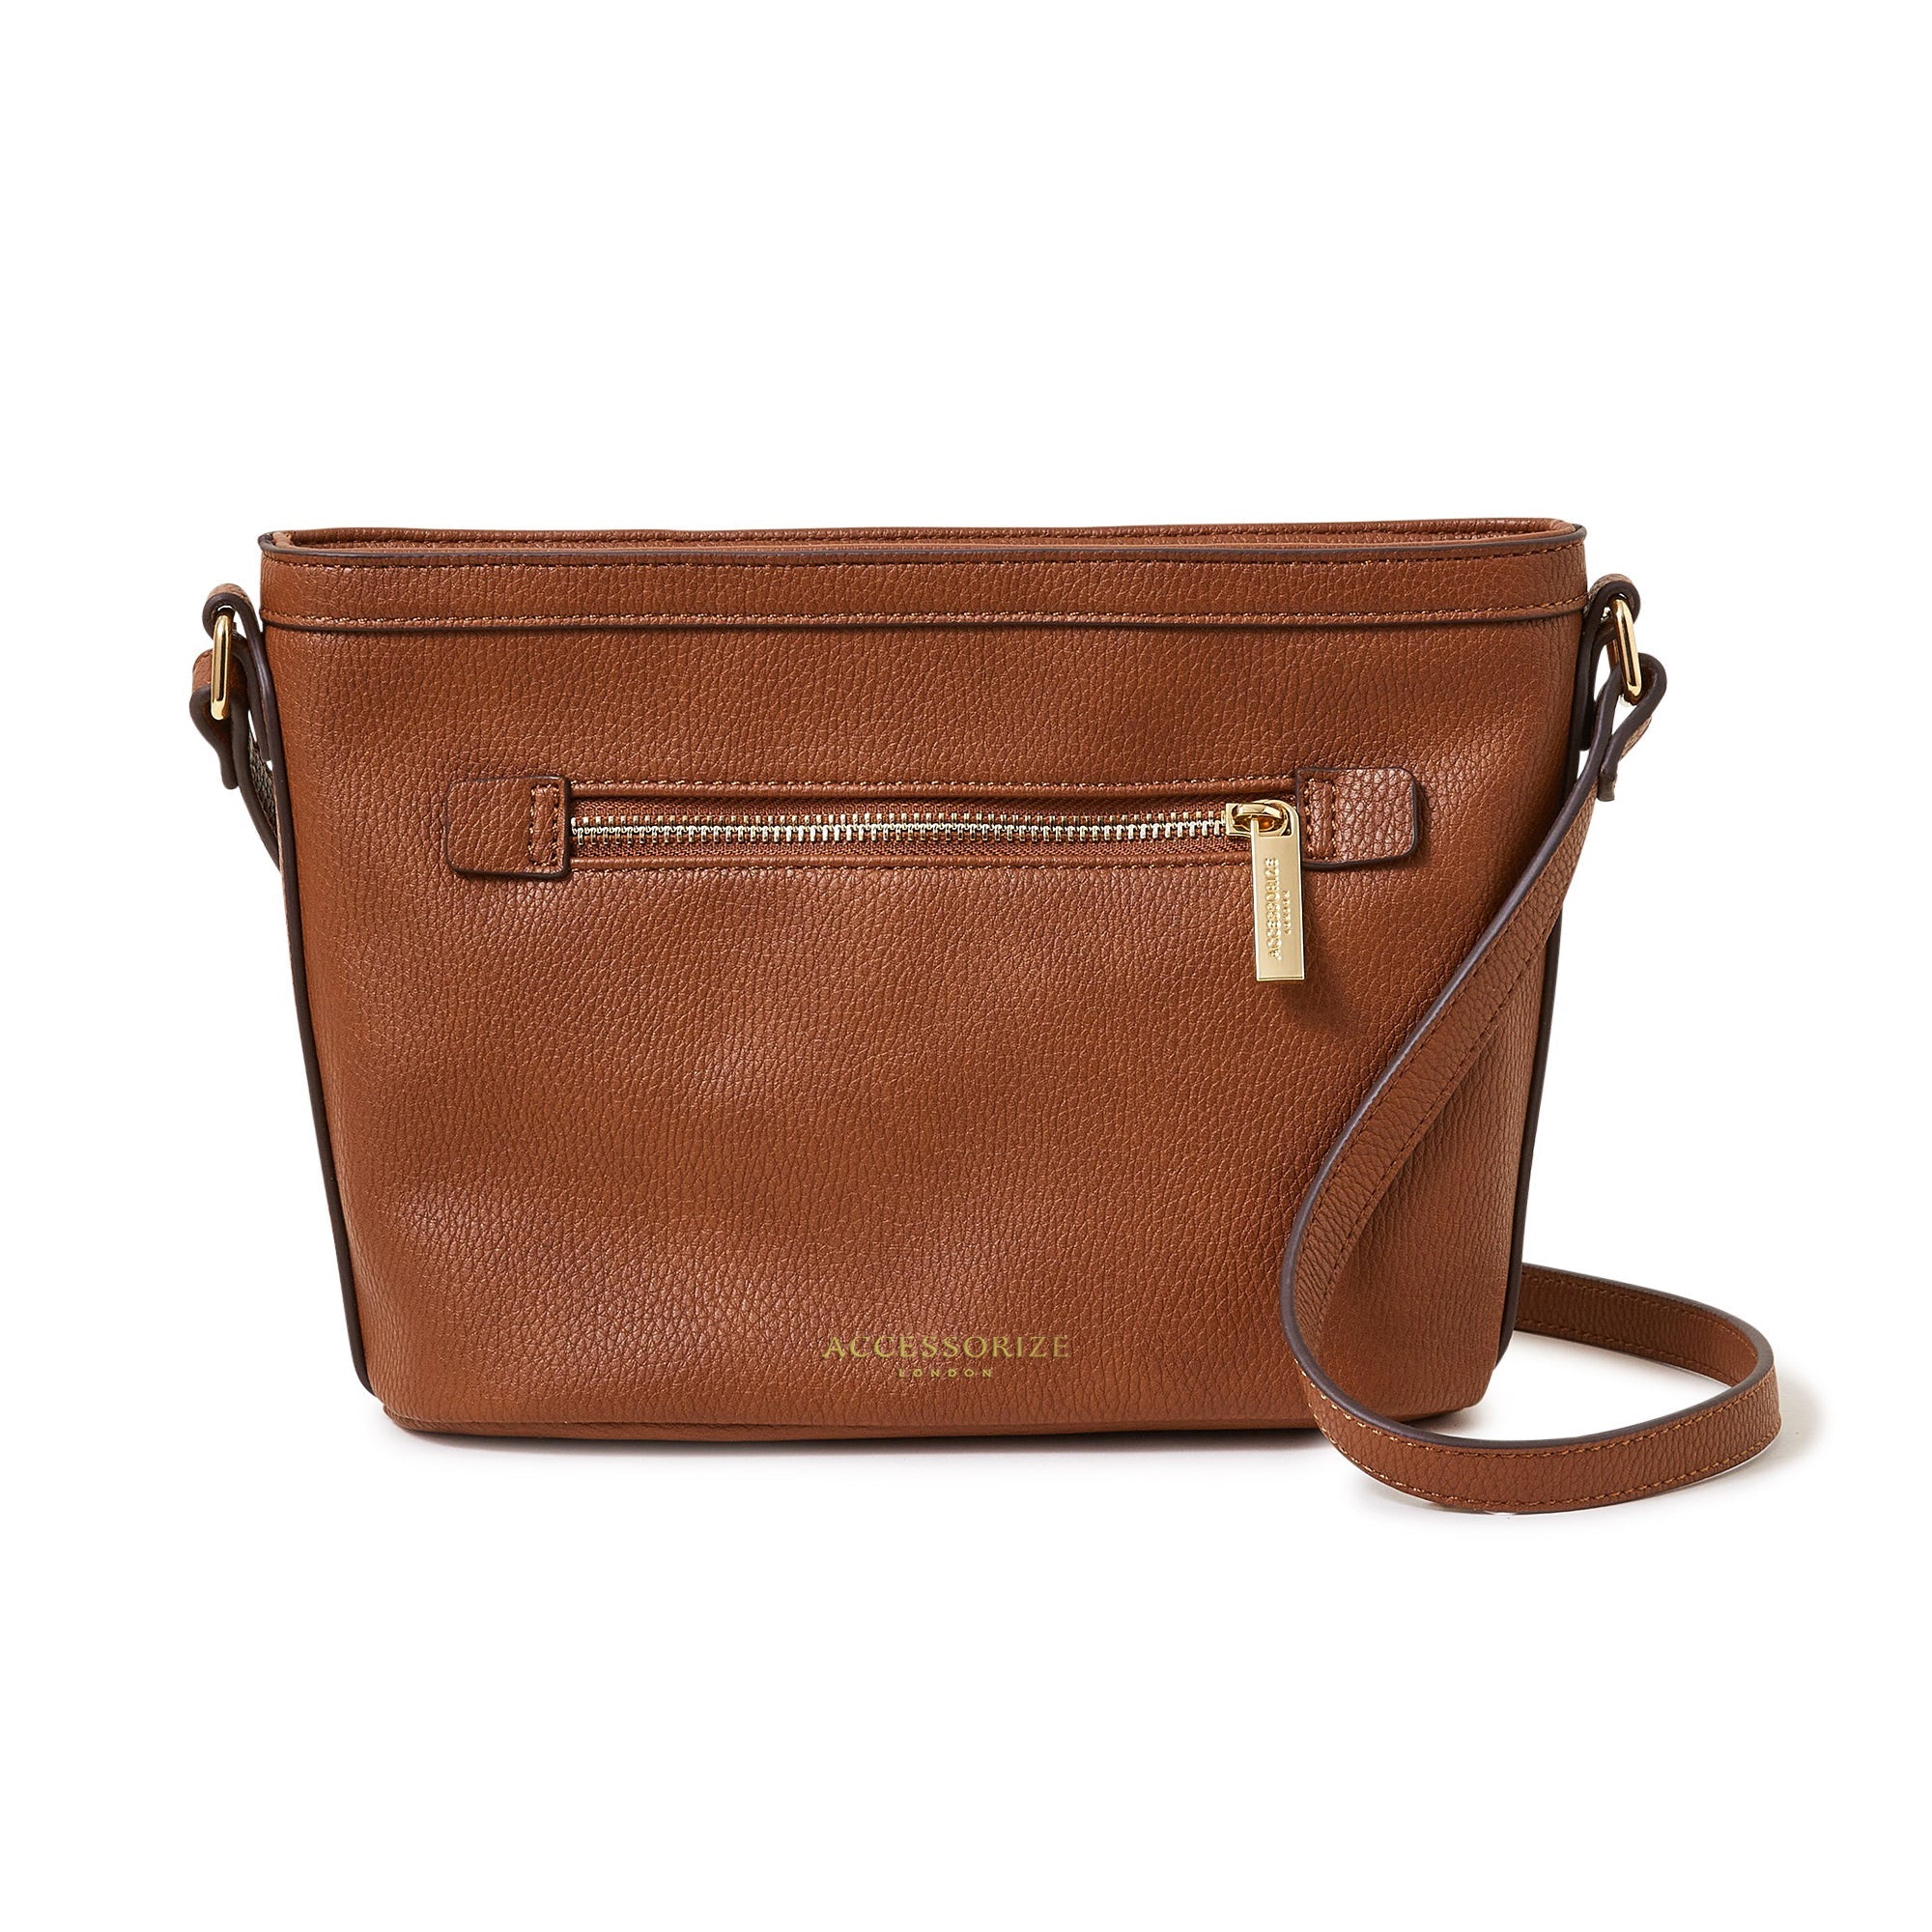 Style and compare Accessorize Brights-Beige Large Crossbody Bag | bags |  Sociomix